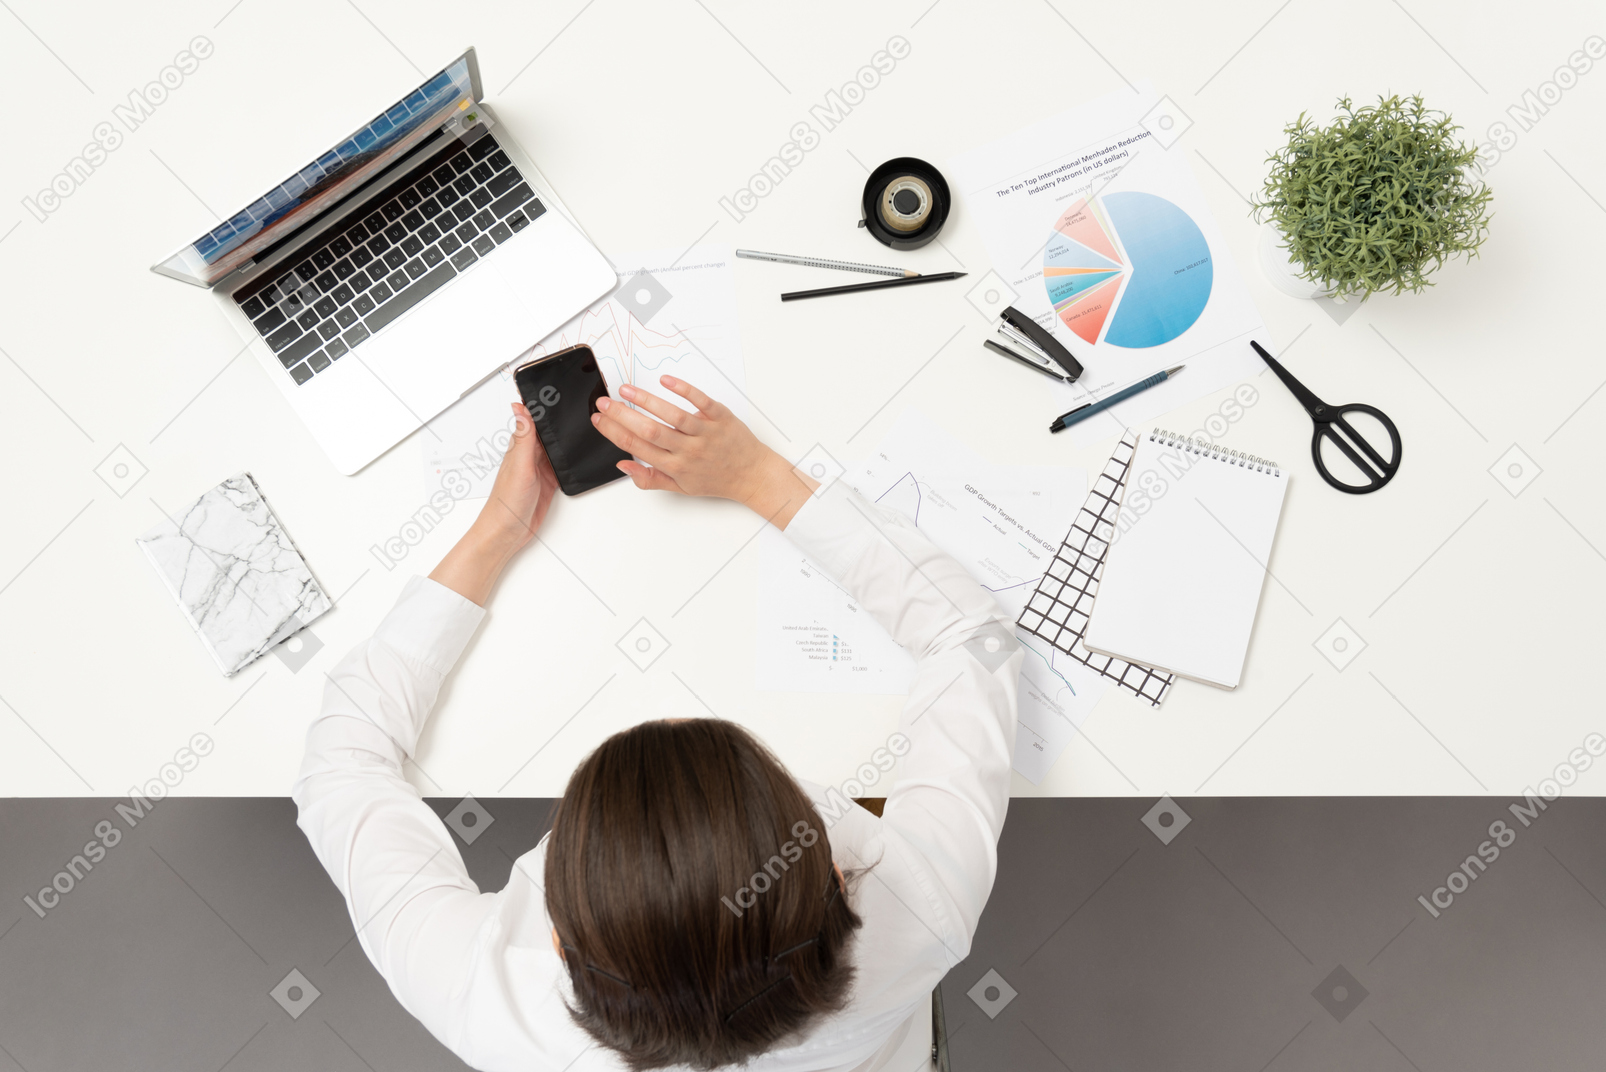 A female office worker using phone